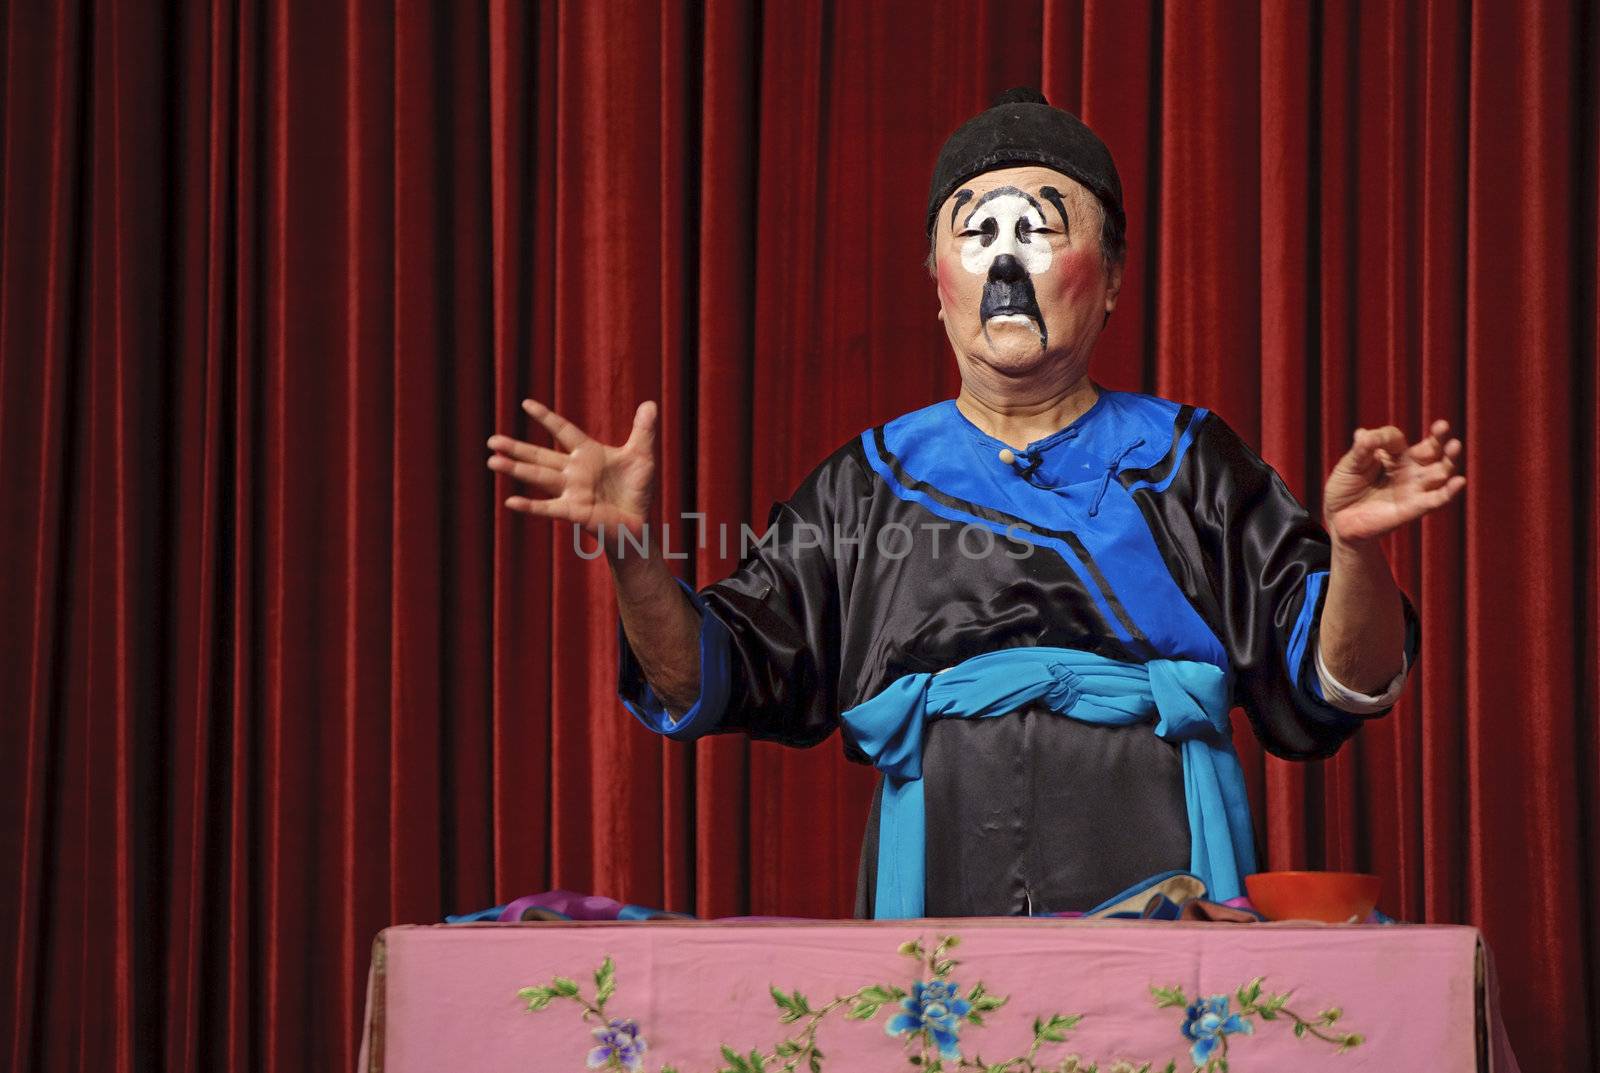 CHENGDU - JUN 5: chinese traditional mime actor performs on stage at Chongzhou theater.Jun 5, 2011 in Chengdu, China.